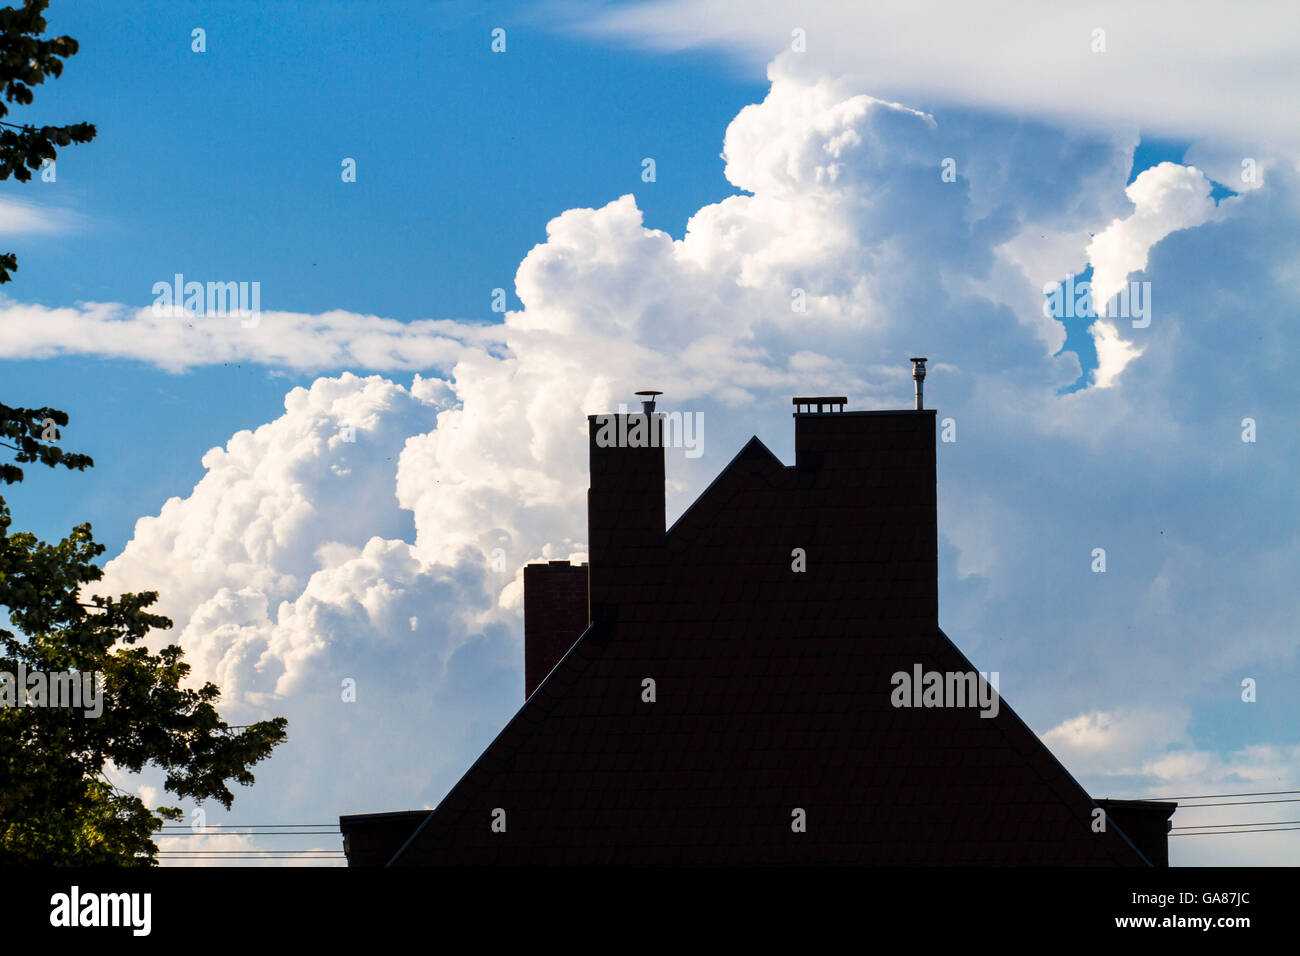 Europe, Germany, Cologne, thunder clouds above gable. Stock Photo